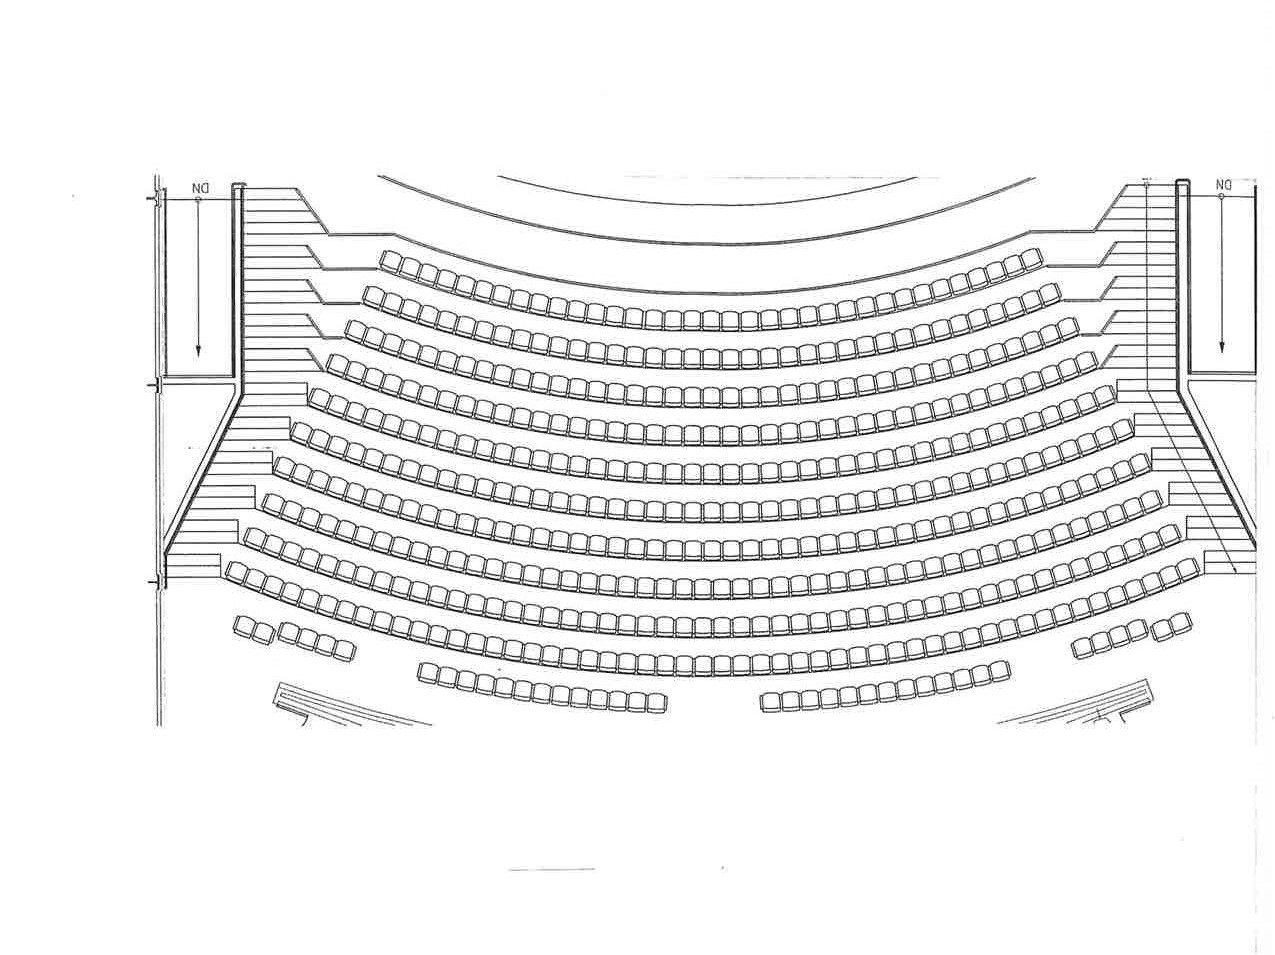 Blank Diagram of IMAX Theater seats